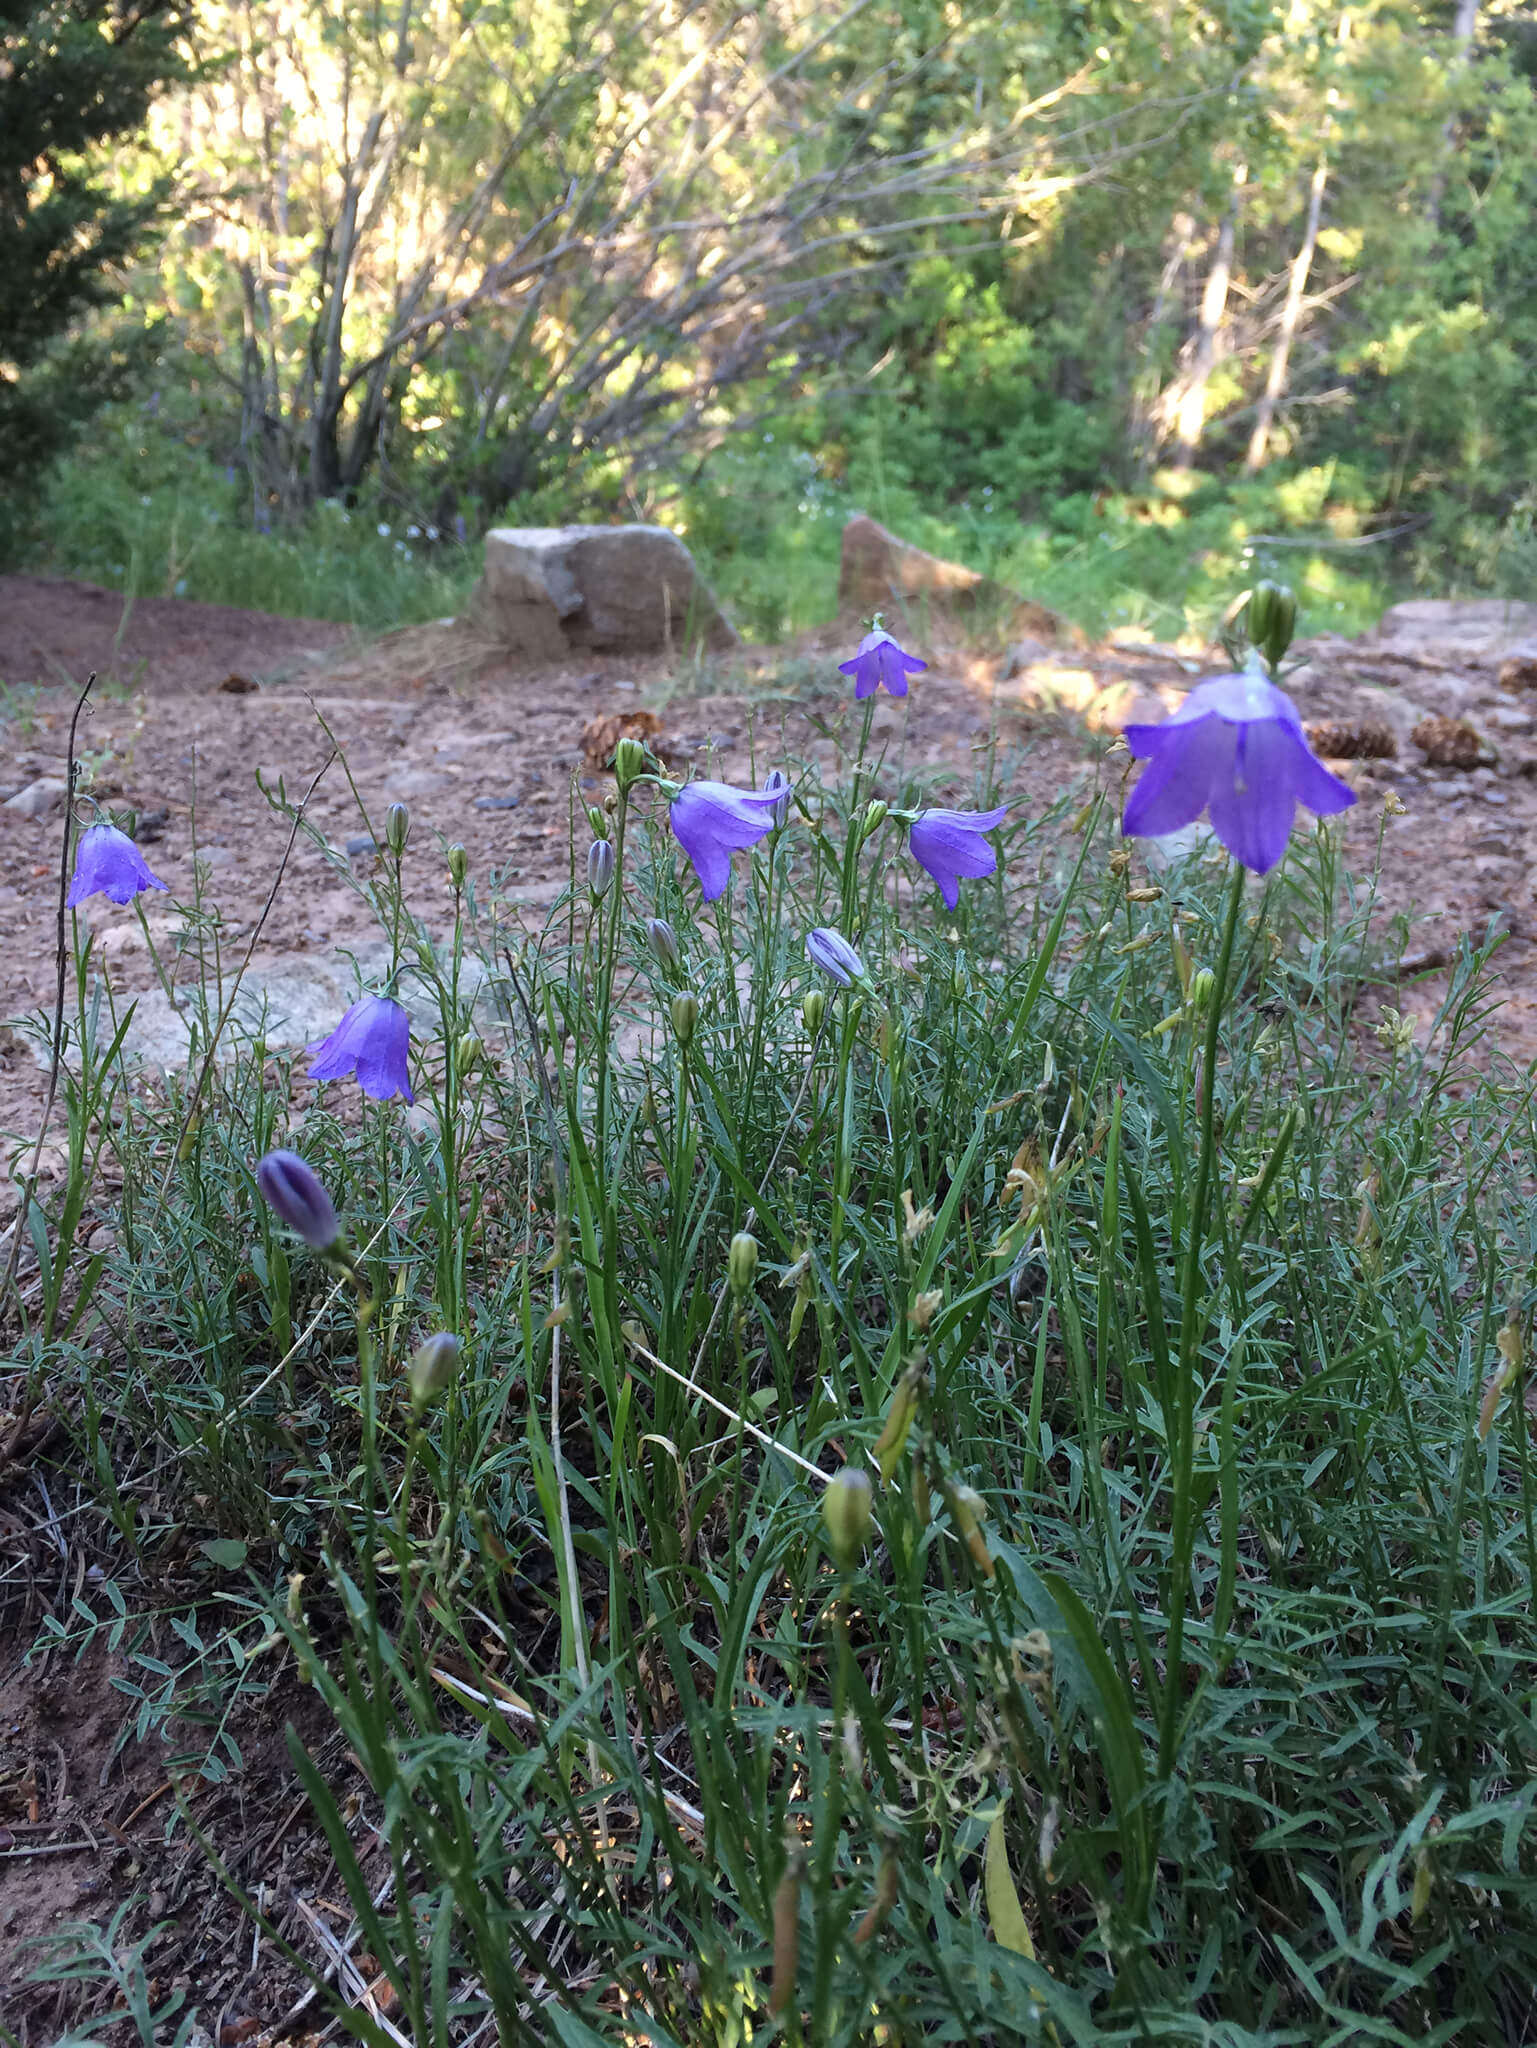 Harebells: Usually found later in summer.